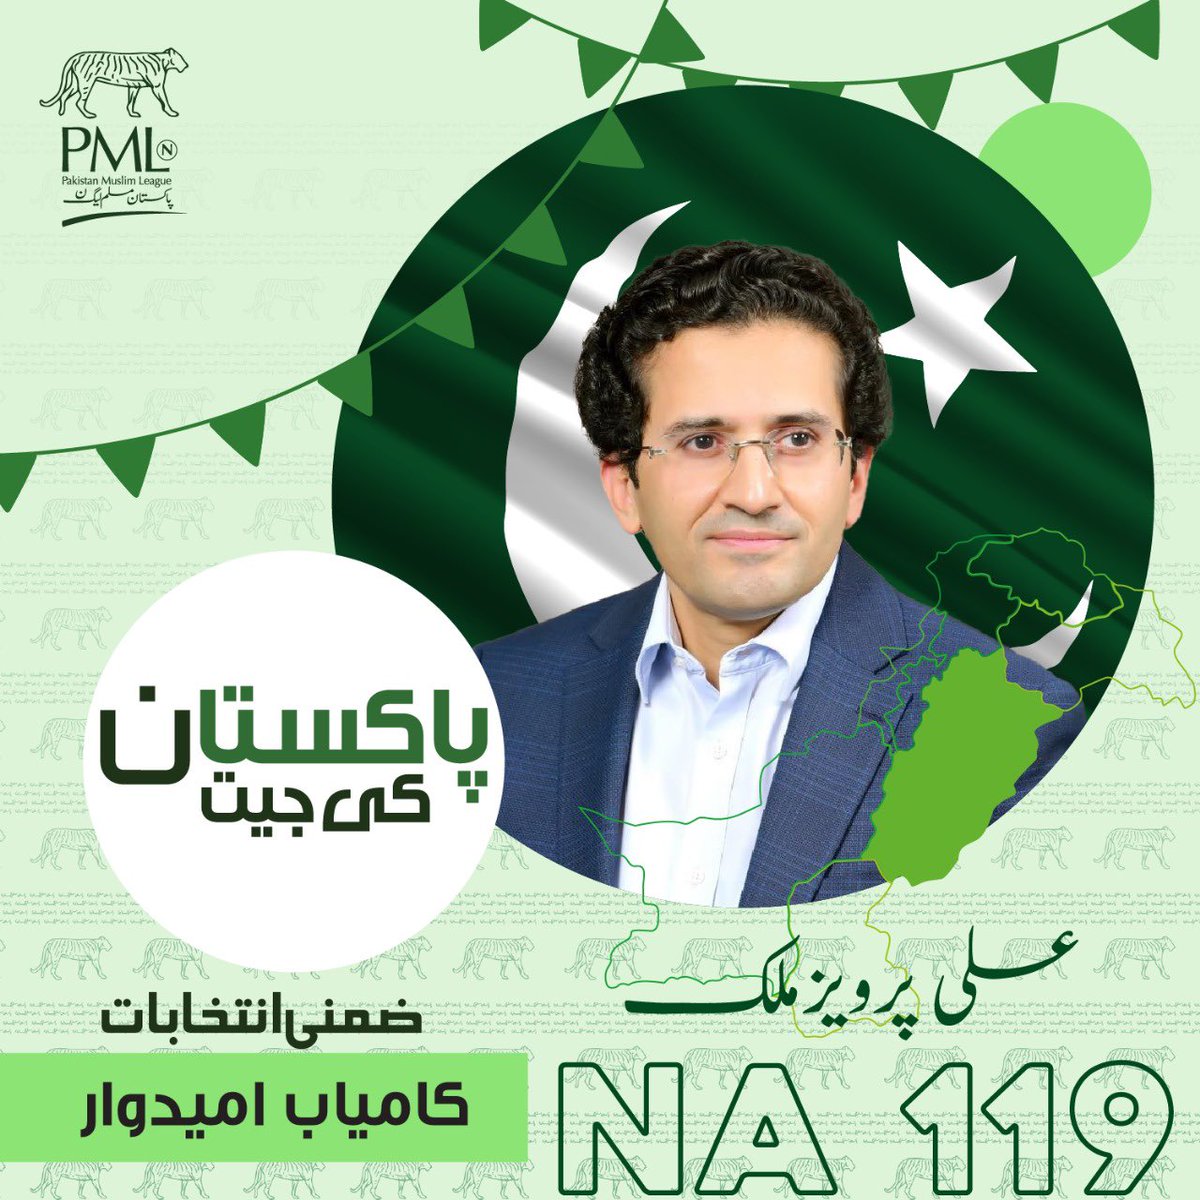 NA-119!! 🐅🐅 Lahore remains the fort of PML-N! Thank you Lahore for always choosing Development.